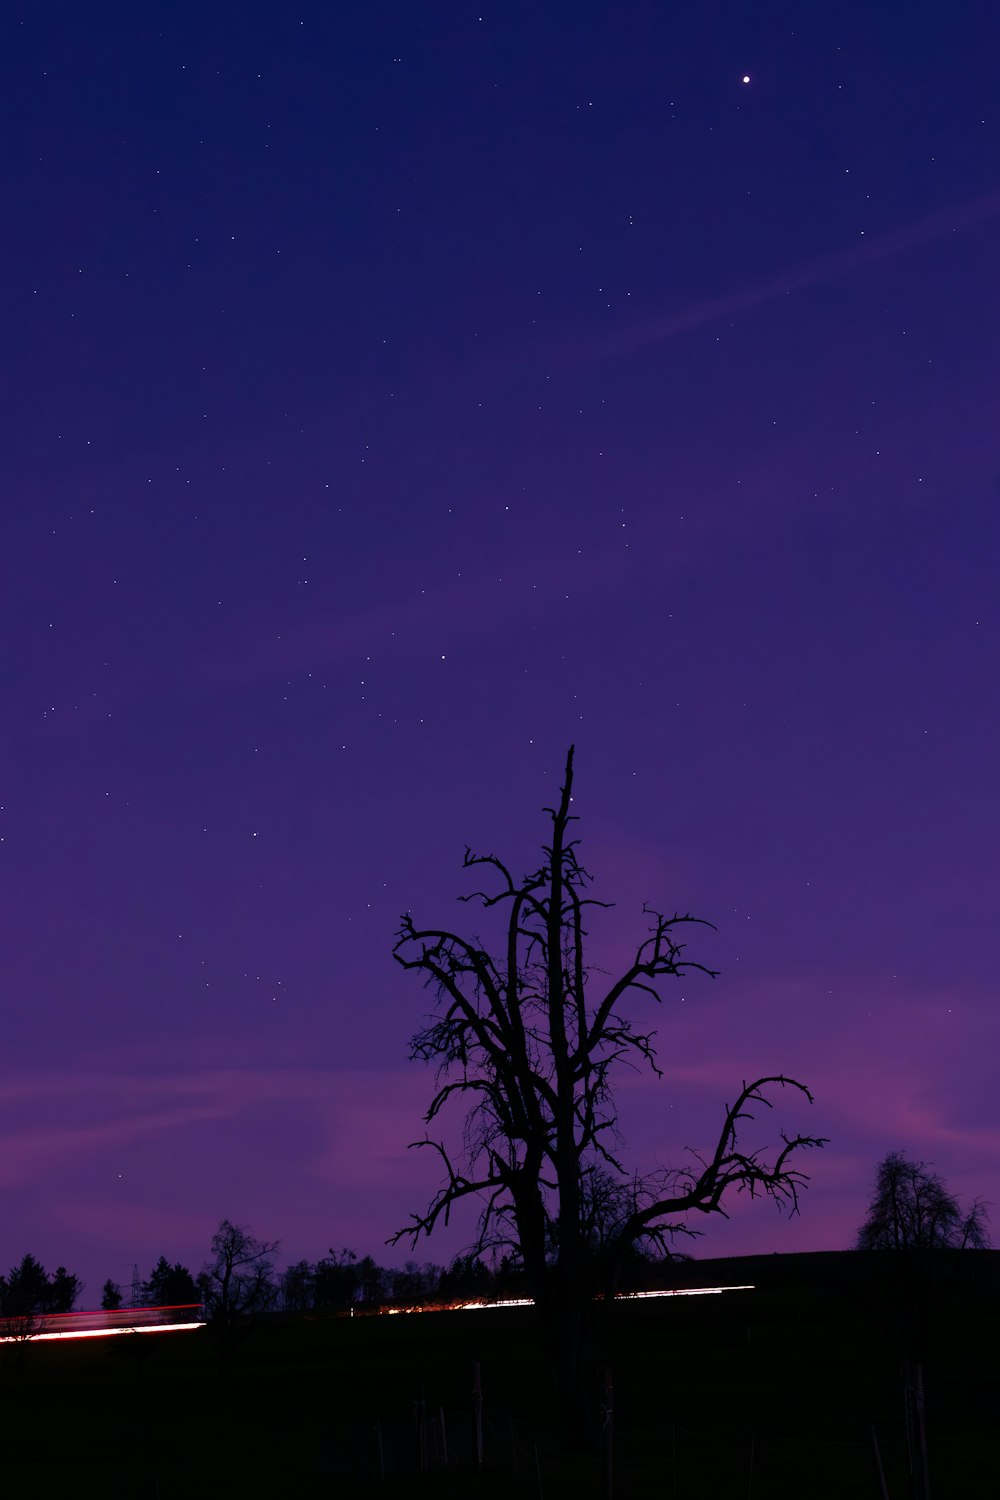 a tree in a field with a purple sky in the background